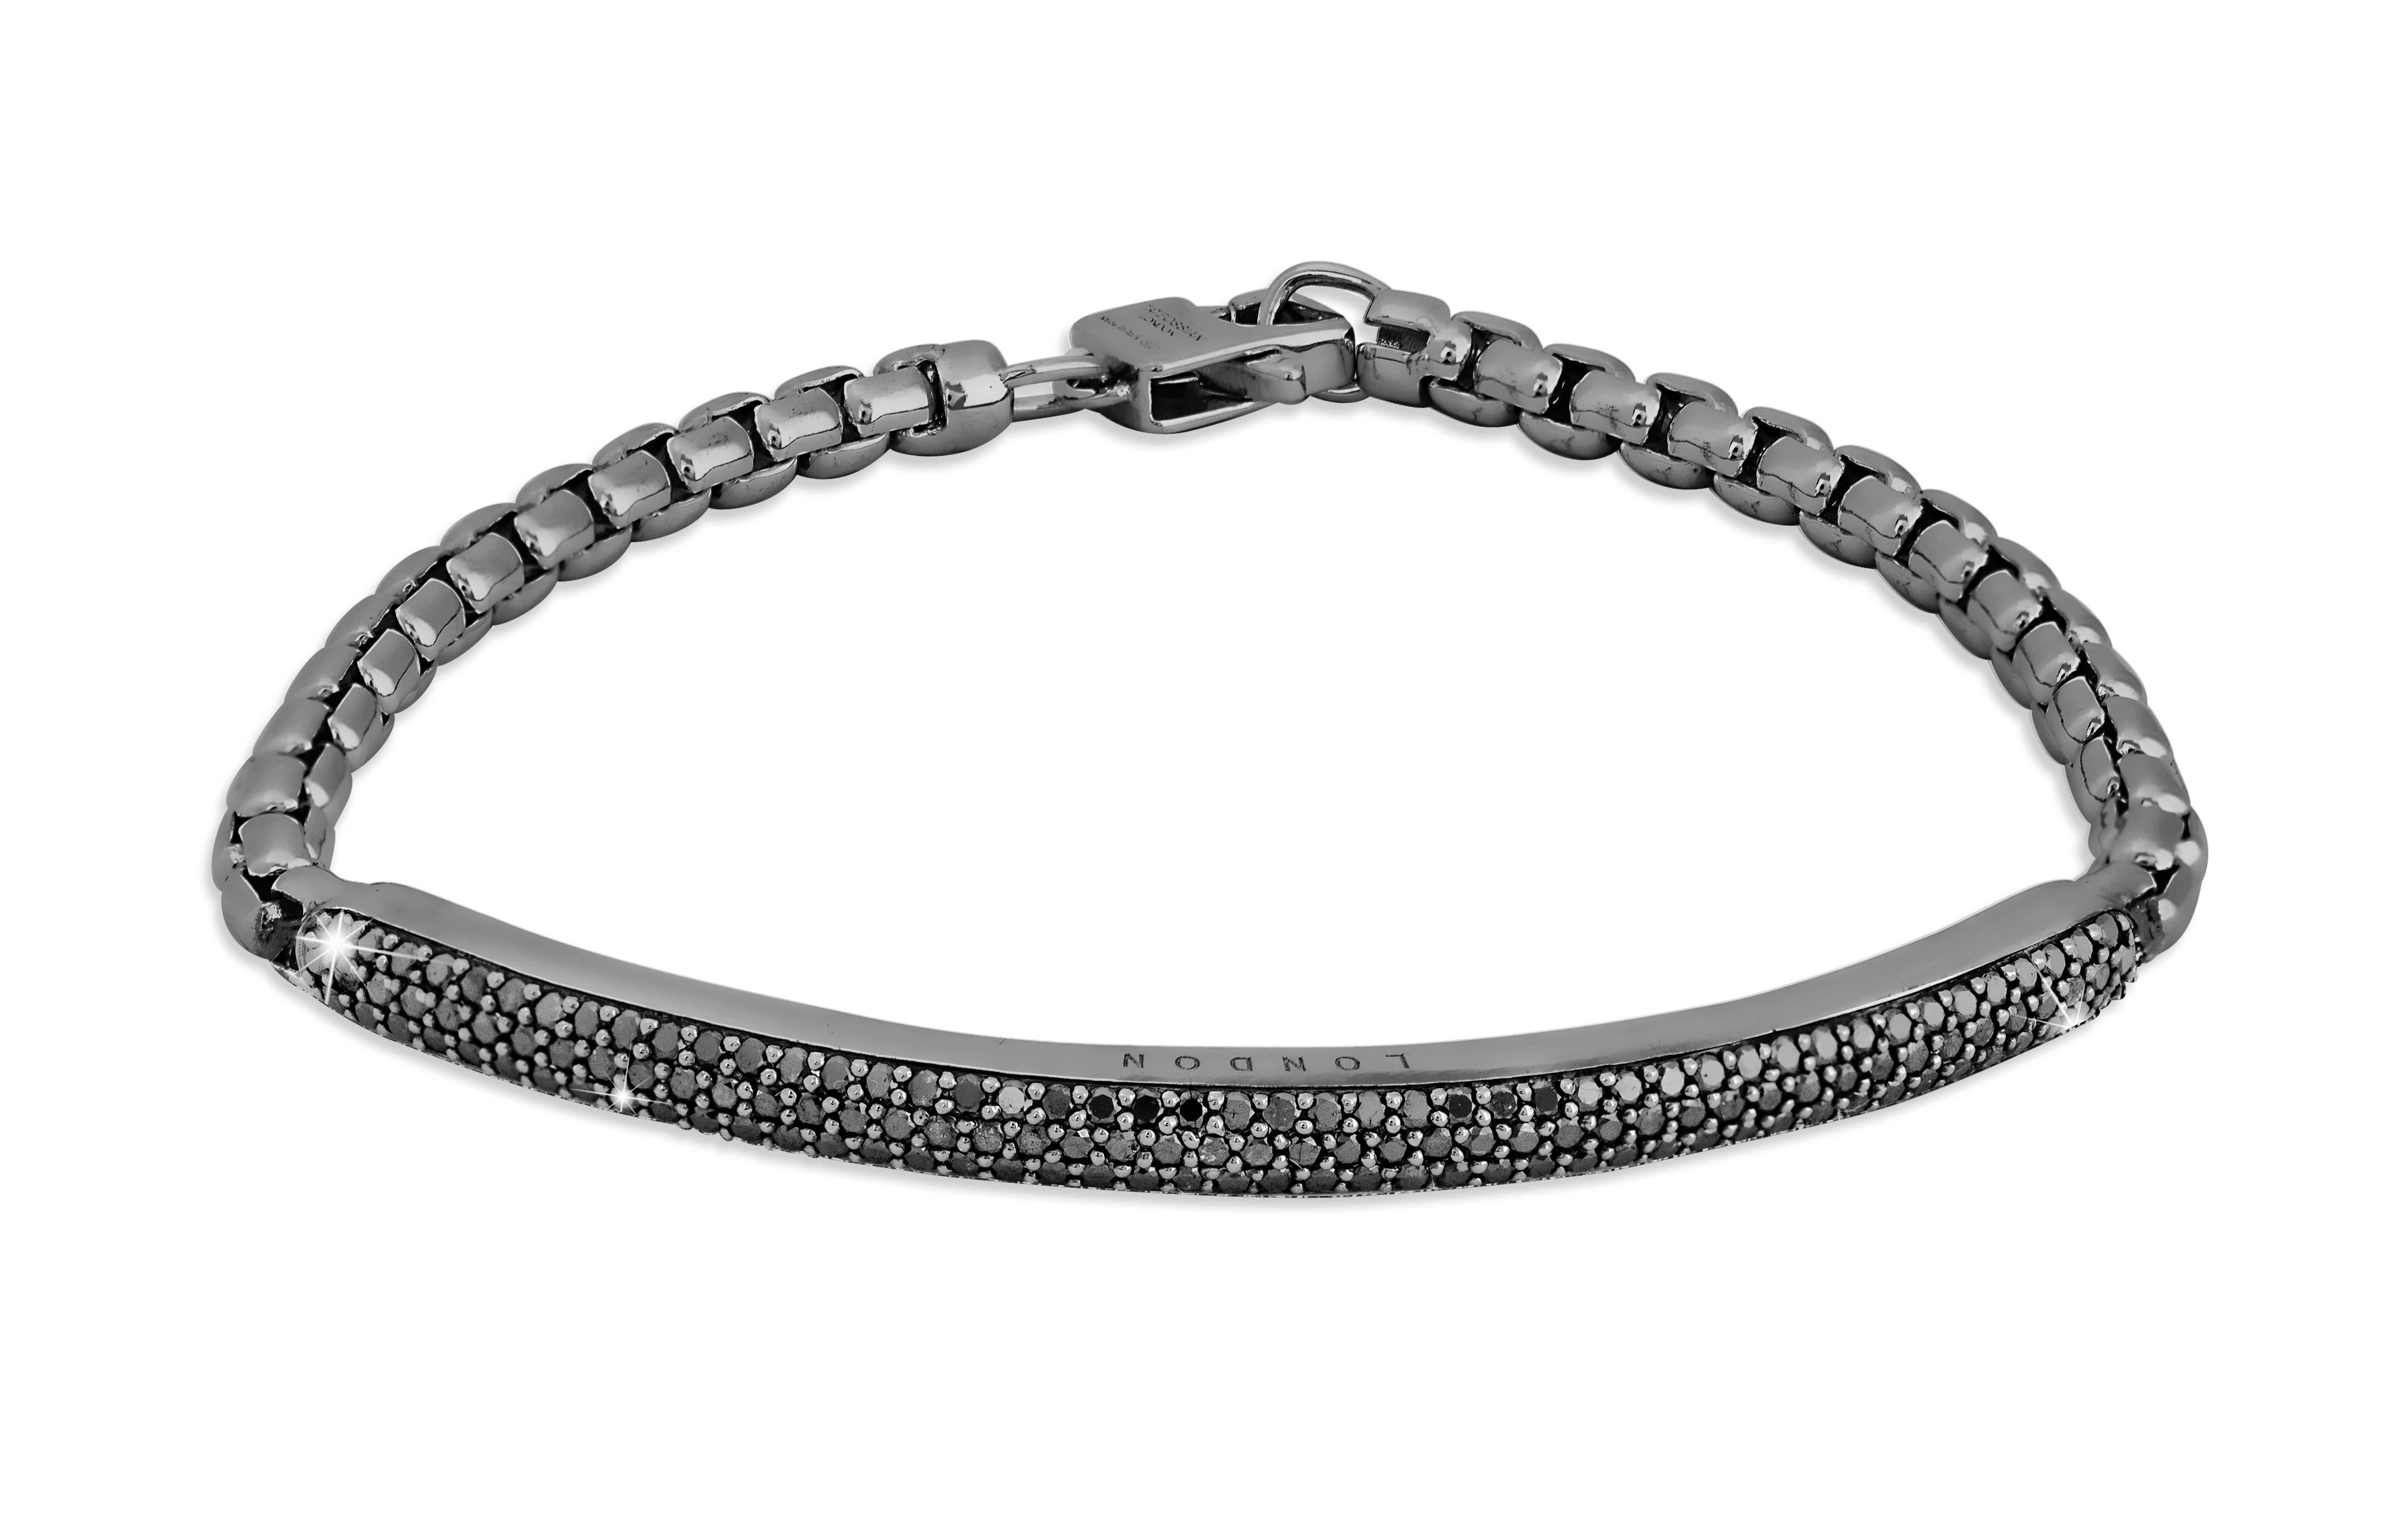 Black Rhodium Plated Sterling Silver Windsor Bracelet with Black Diamonds, Size M

This bracelet features a sterling silver ID bar set with a pave surface of 139 black diamonds. All the precious stones are hand-selected and all handset under a